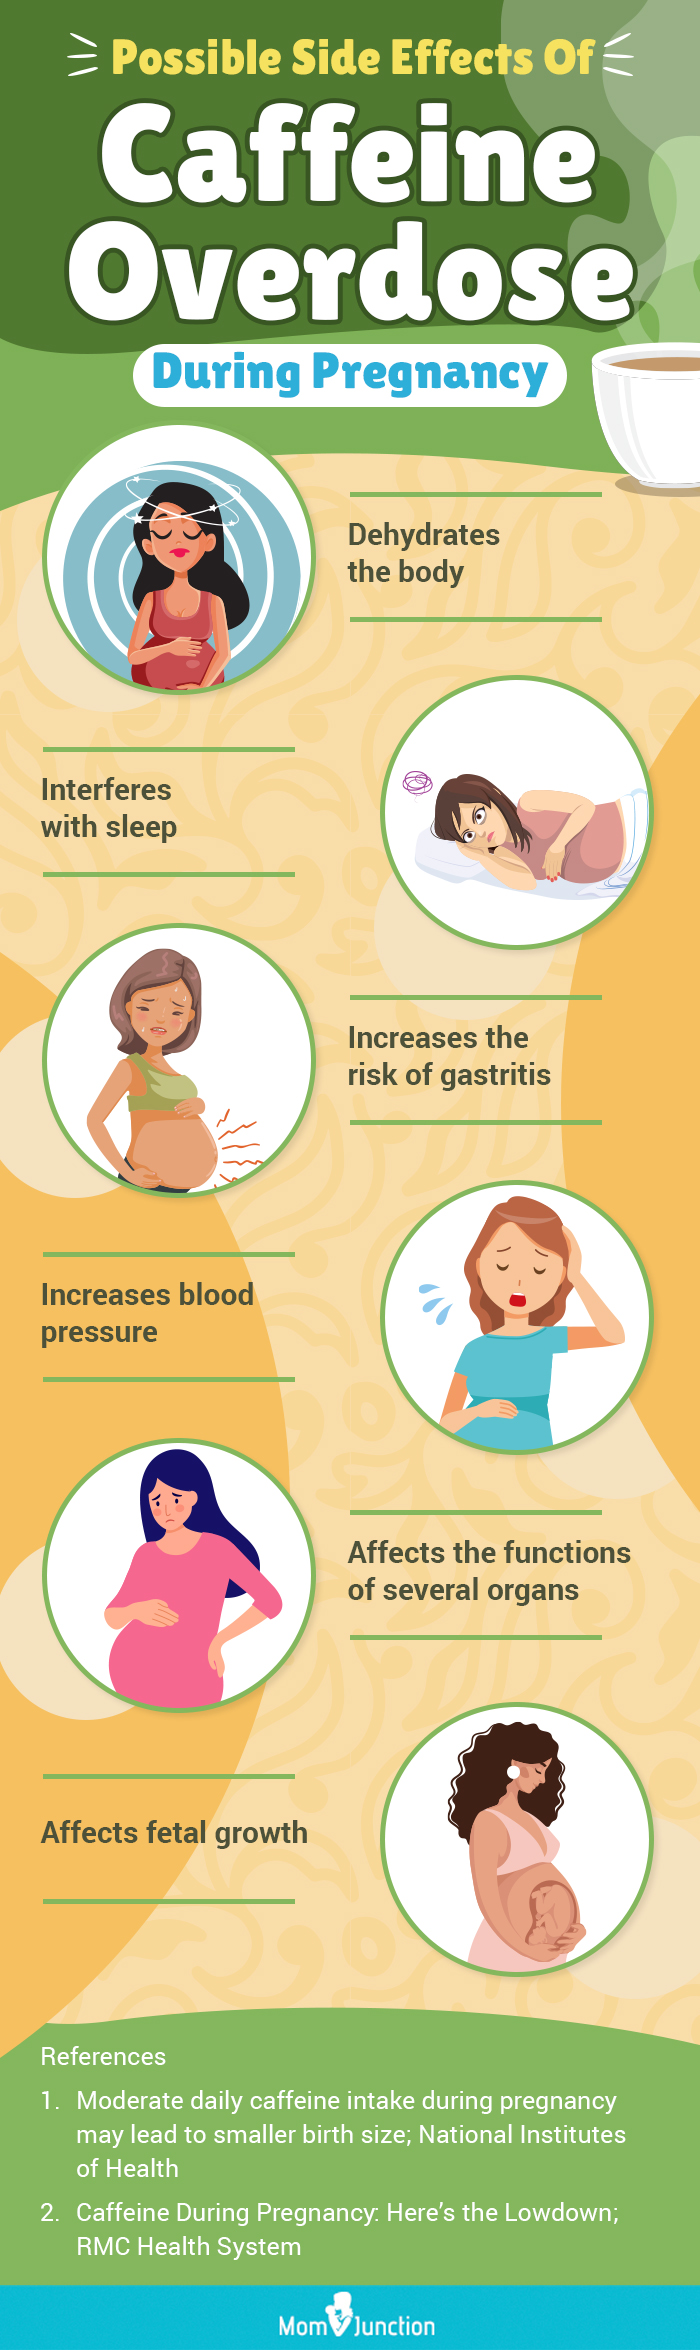 possible side effects of caffeine overdose during pregnancy (infographic)